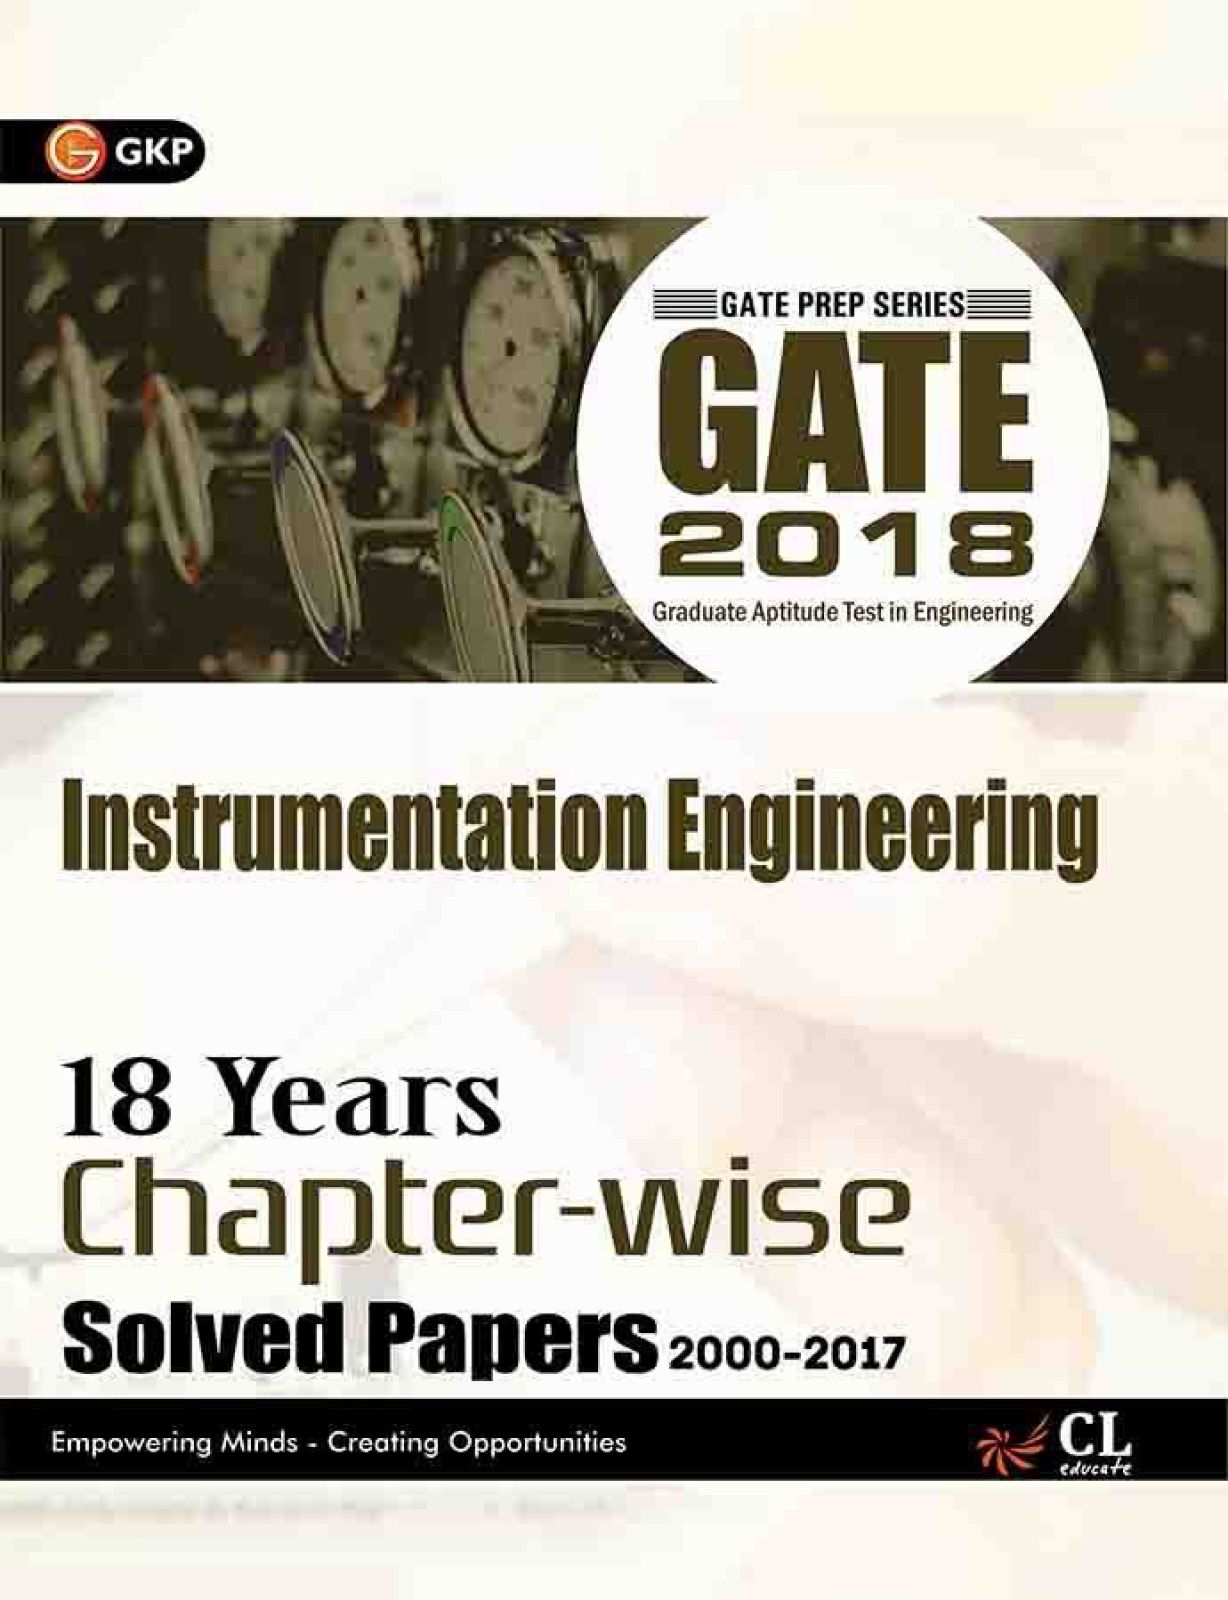 Flipkart: Buy GATE – Instrumentation Engineering 2018 : 18 Years Chapter-wise Solved Papers 2000-2017 First Edition (English, Paperback, GK Publications) at Rs 79 only